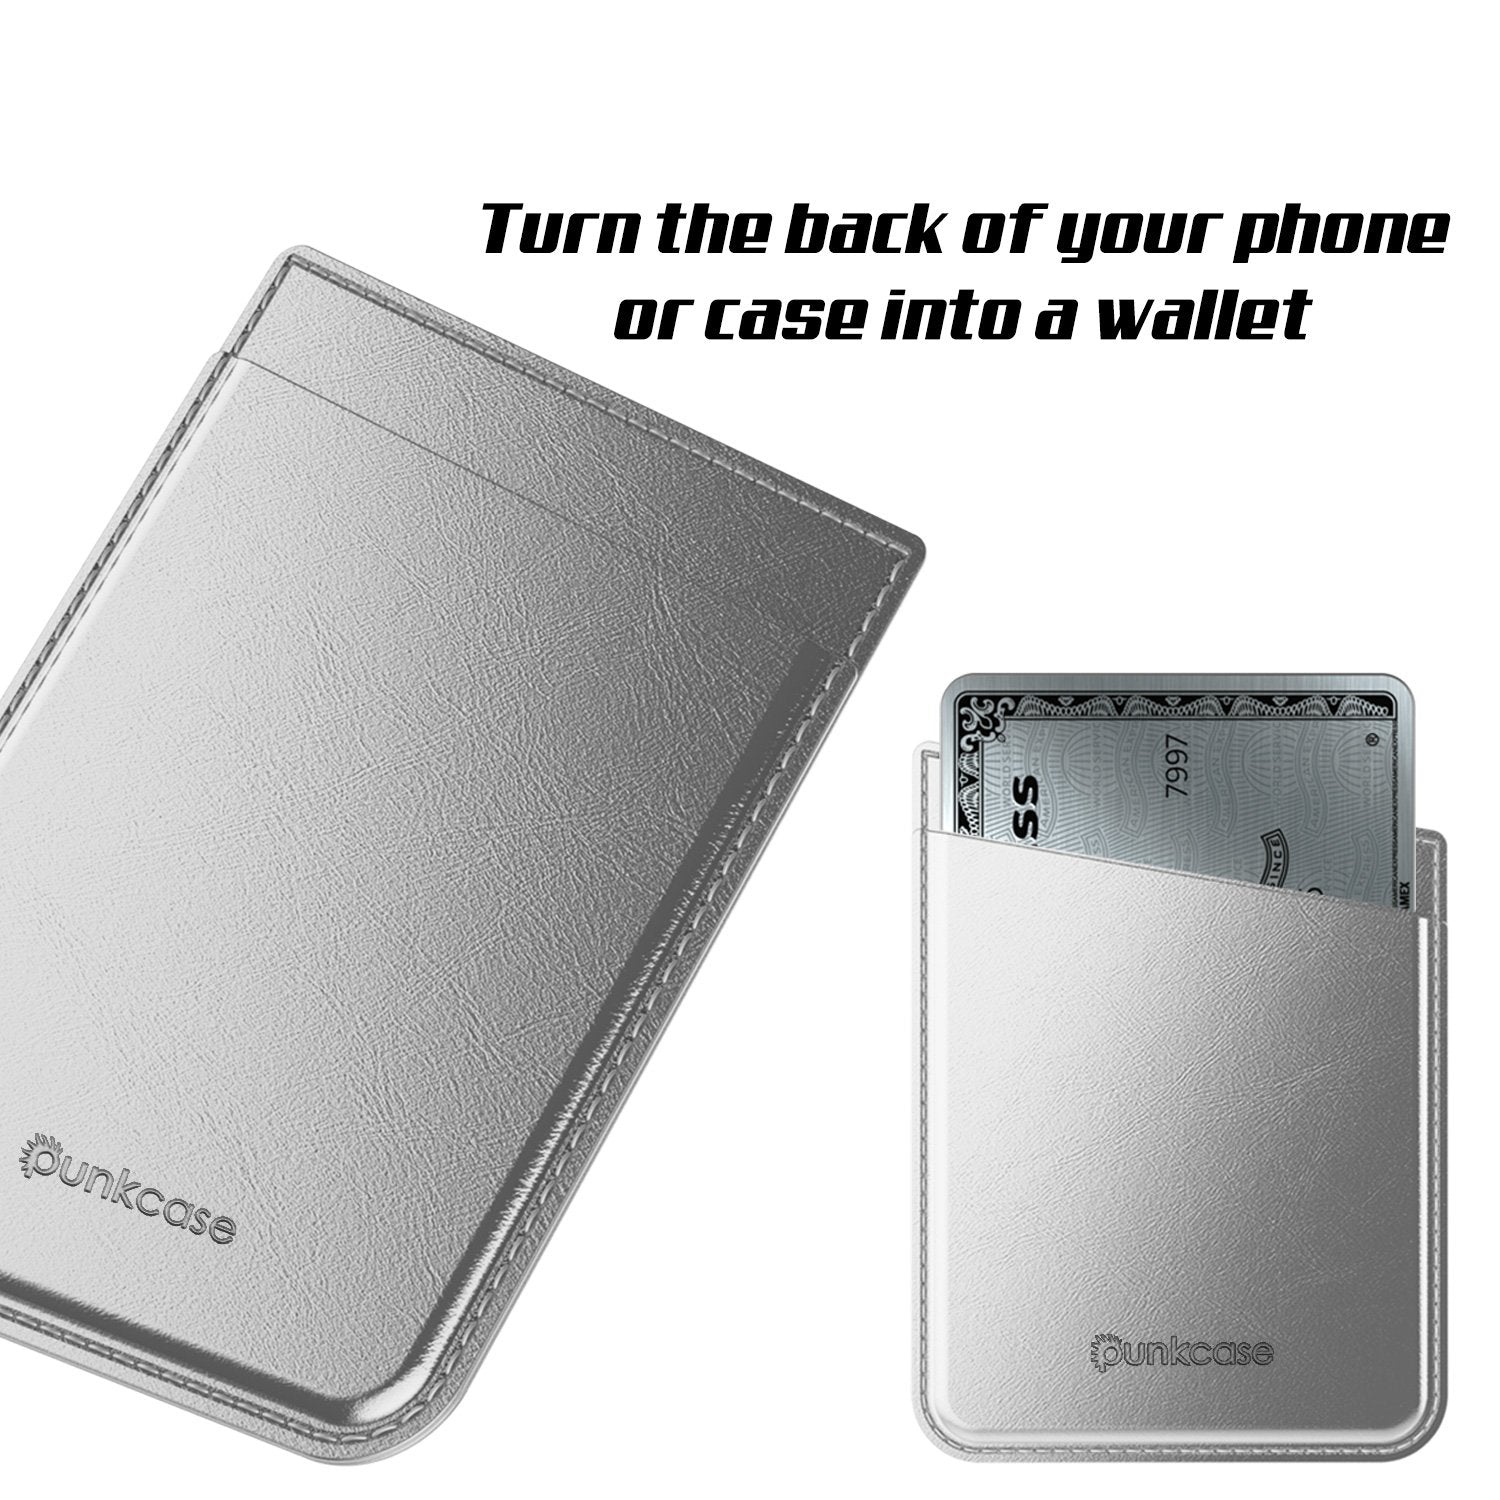 PunkCase CardStud Deluxe Stick On Wallet | Adhesive Card Holder Attachment for Back of iPhone, Android & More | Leather Pouch | [Silver] - PunkCase NZ